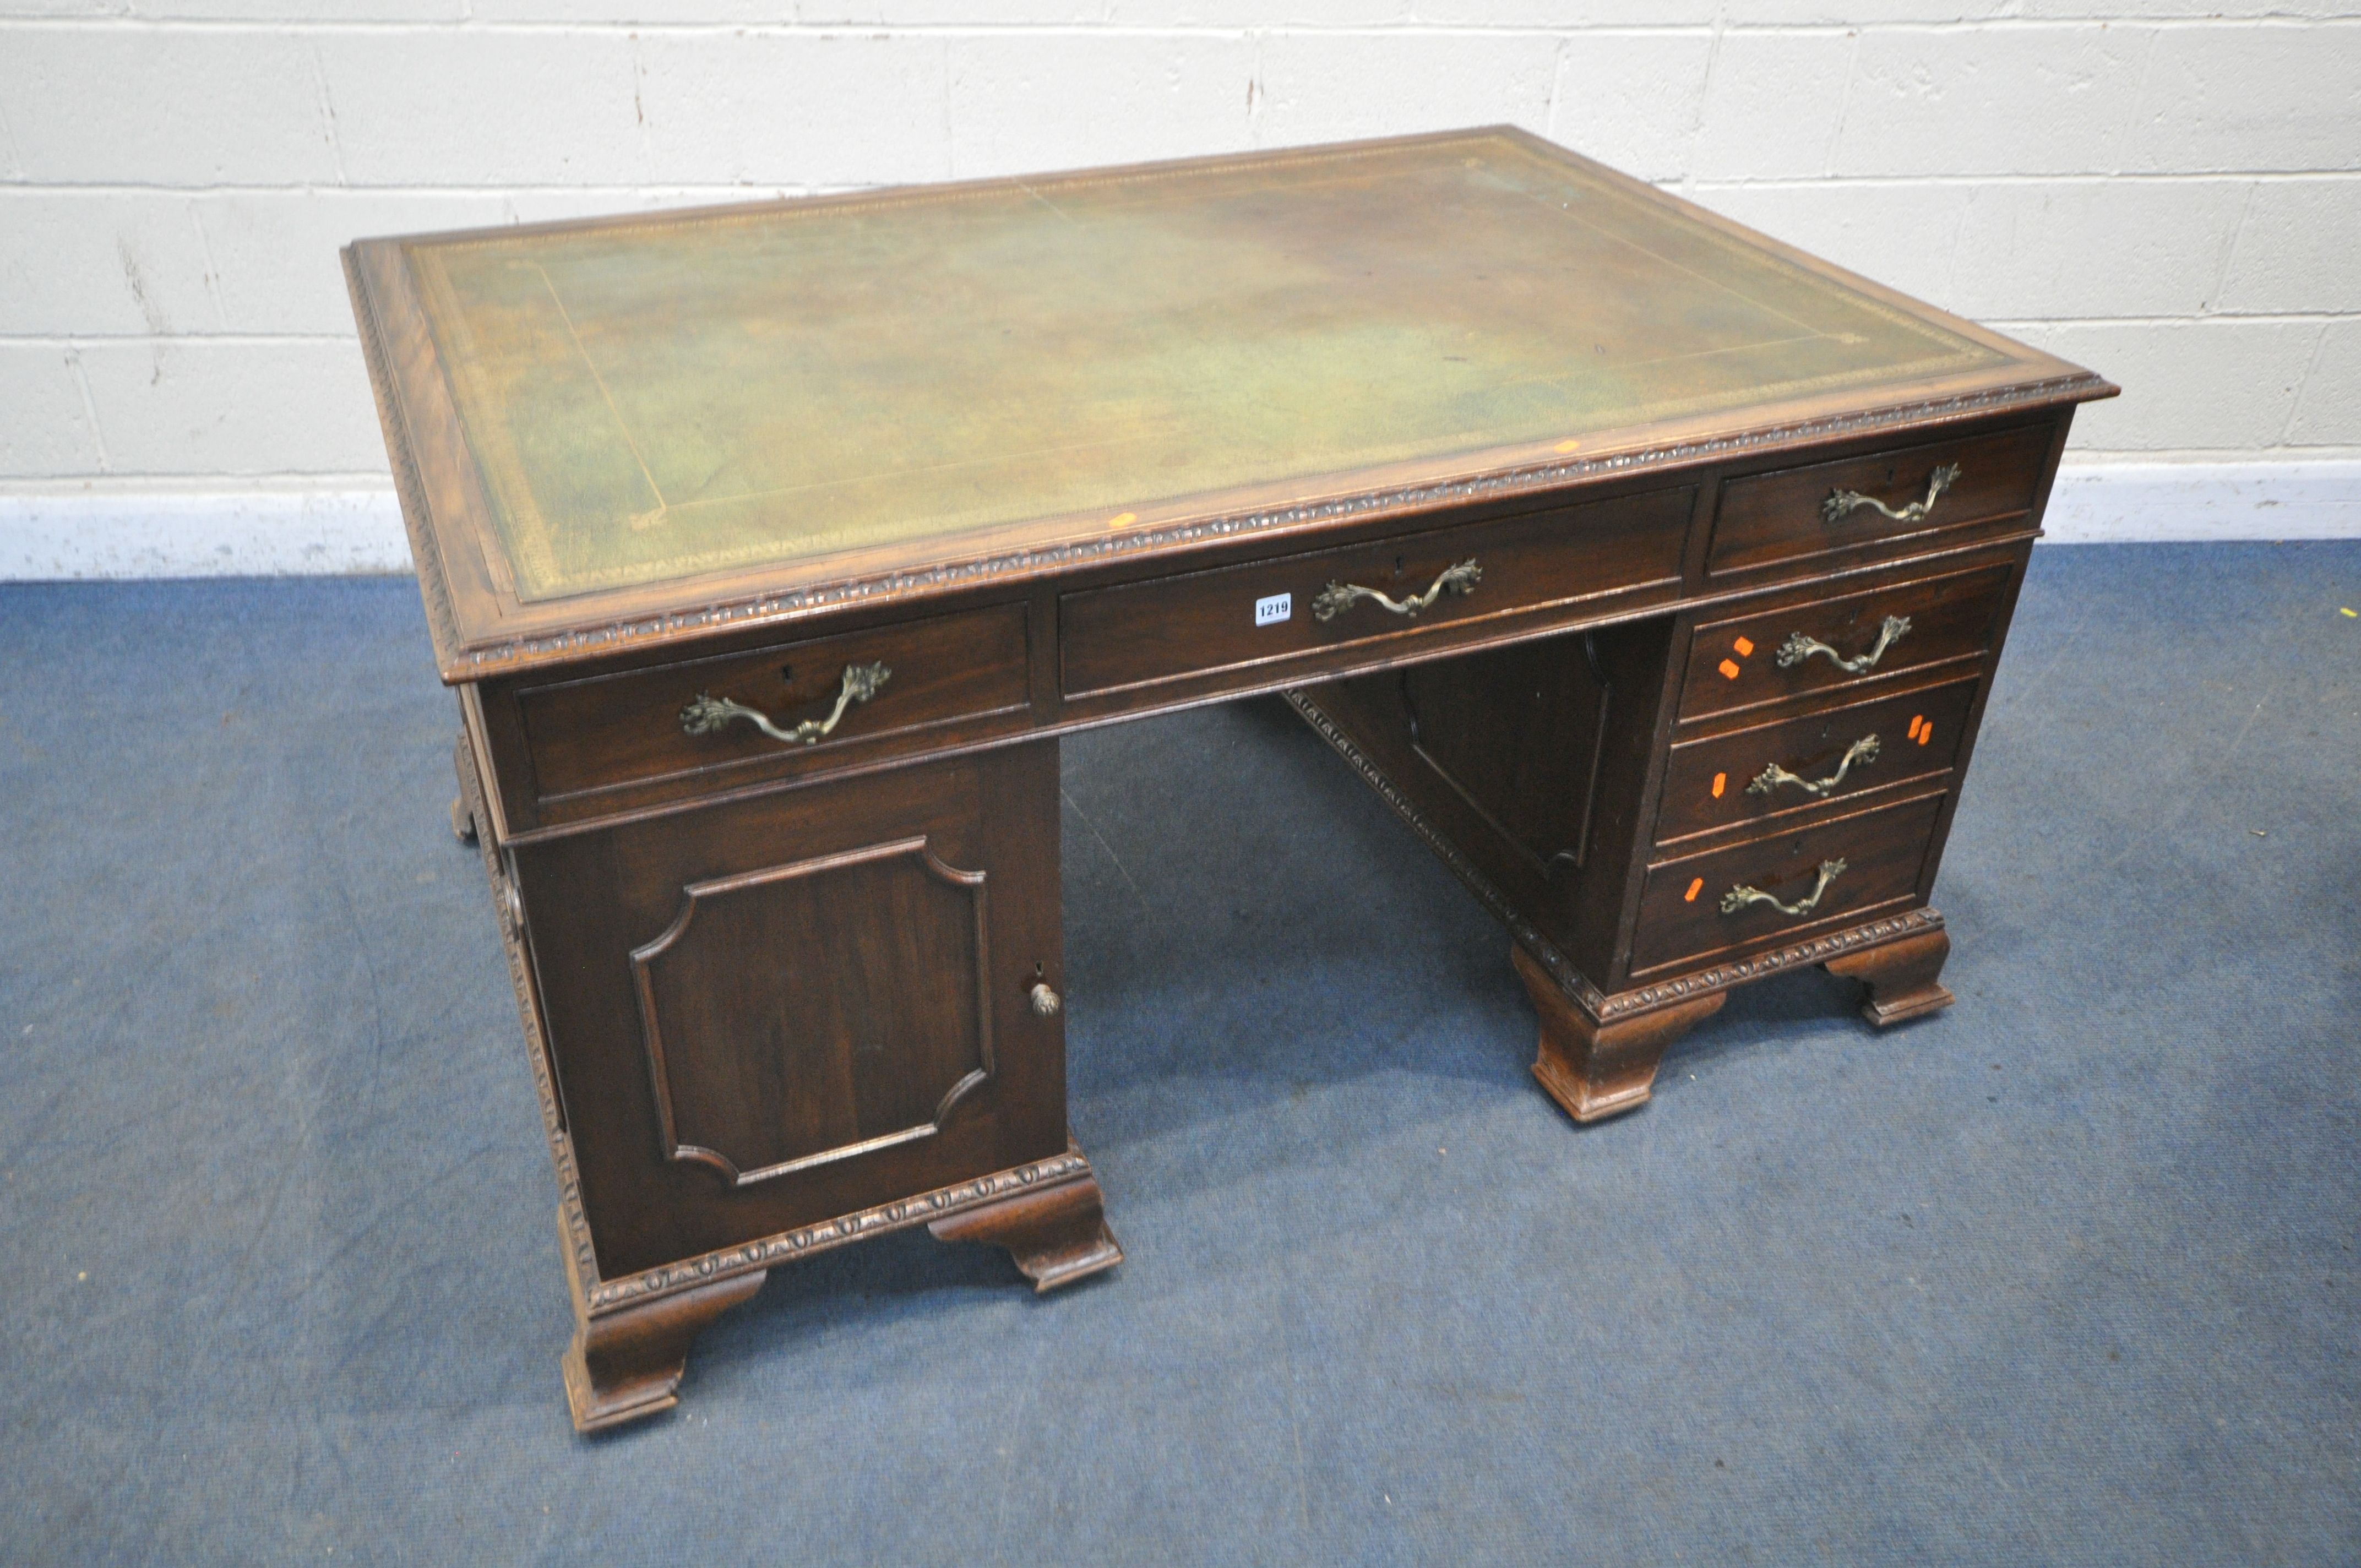 A REPRODUCTION GEORGIAN STYLE MAHOGANY PARTNERS DESK, with a green and tooled gilt leather writing